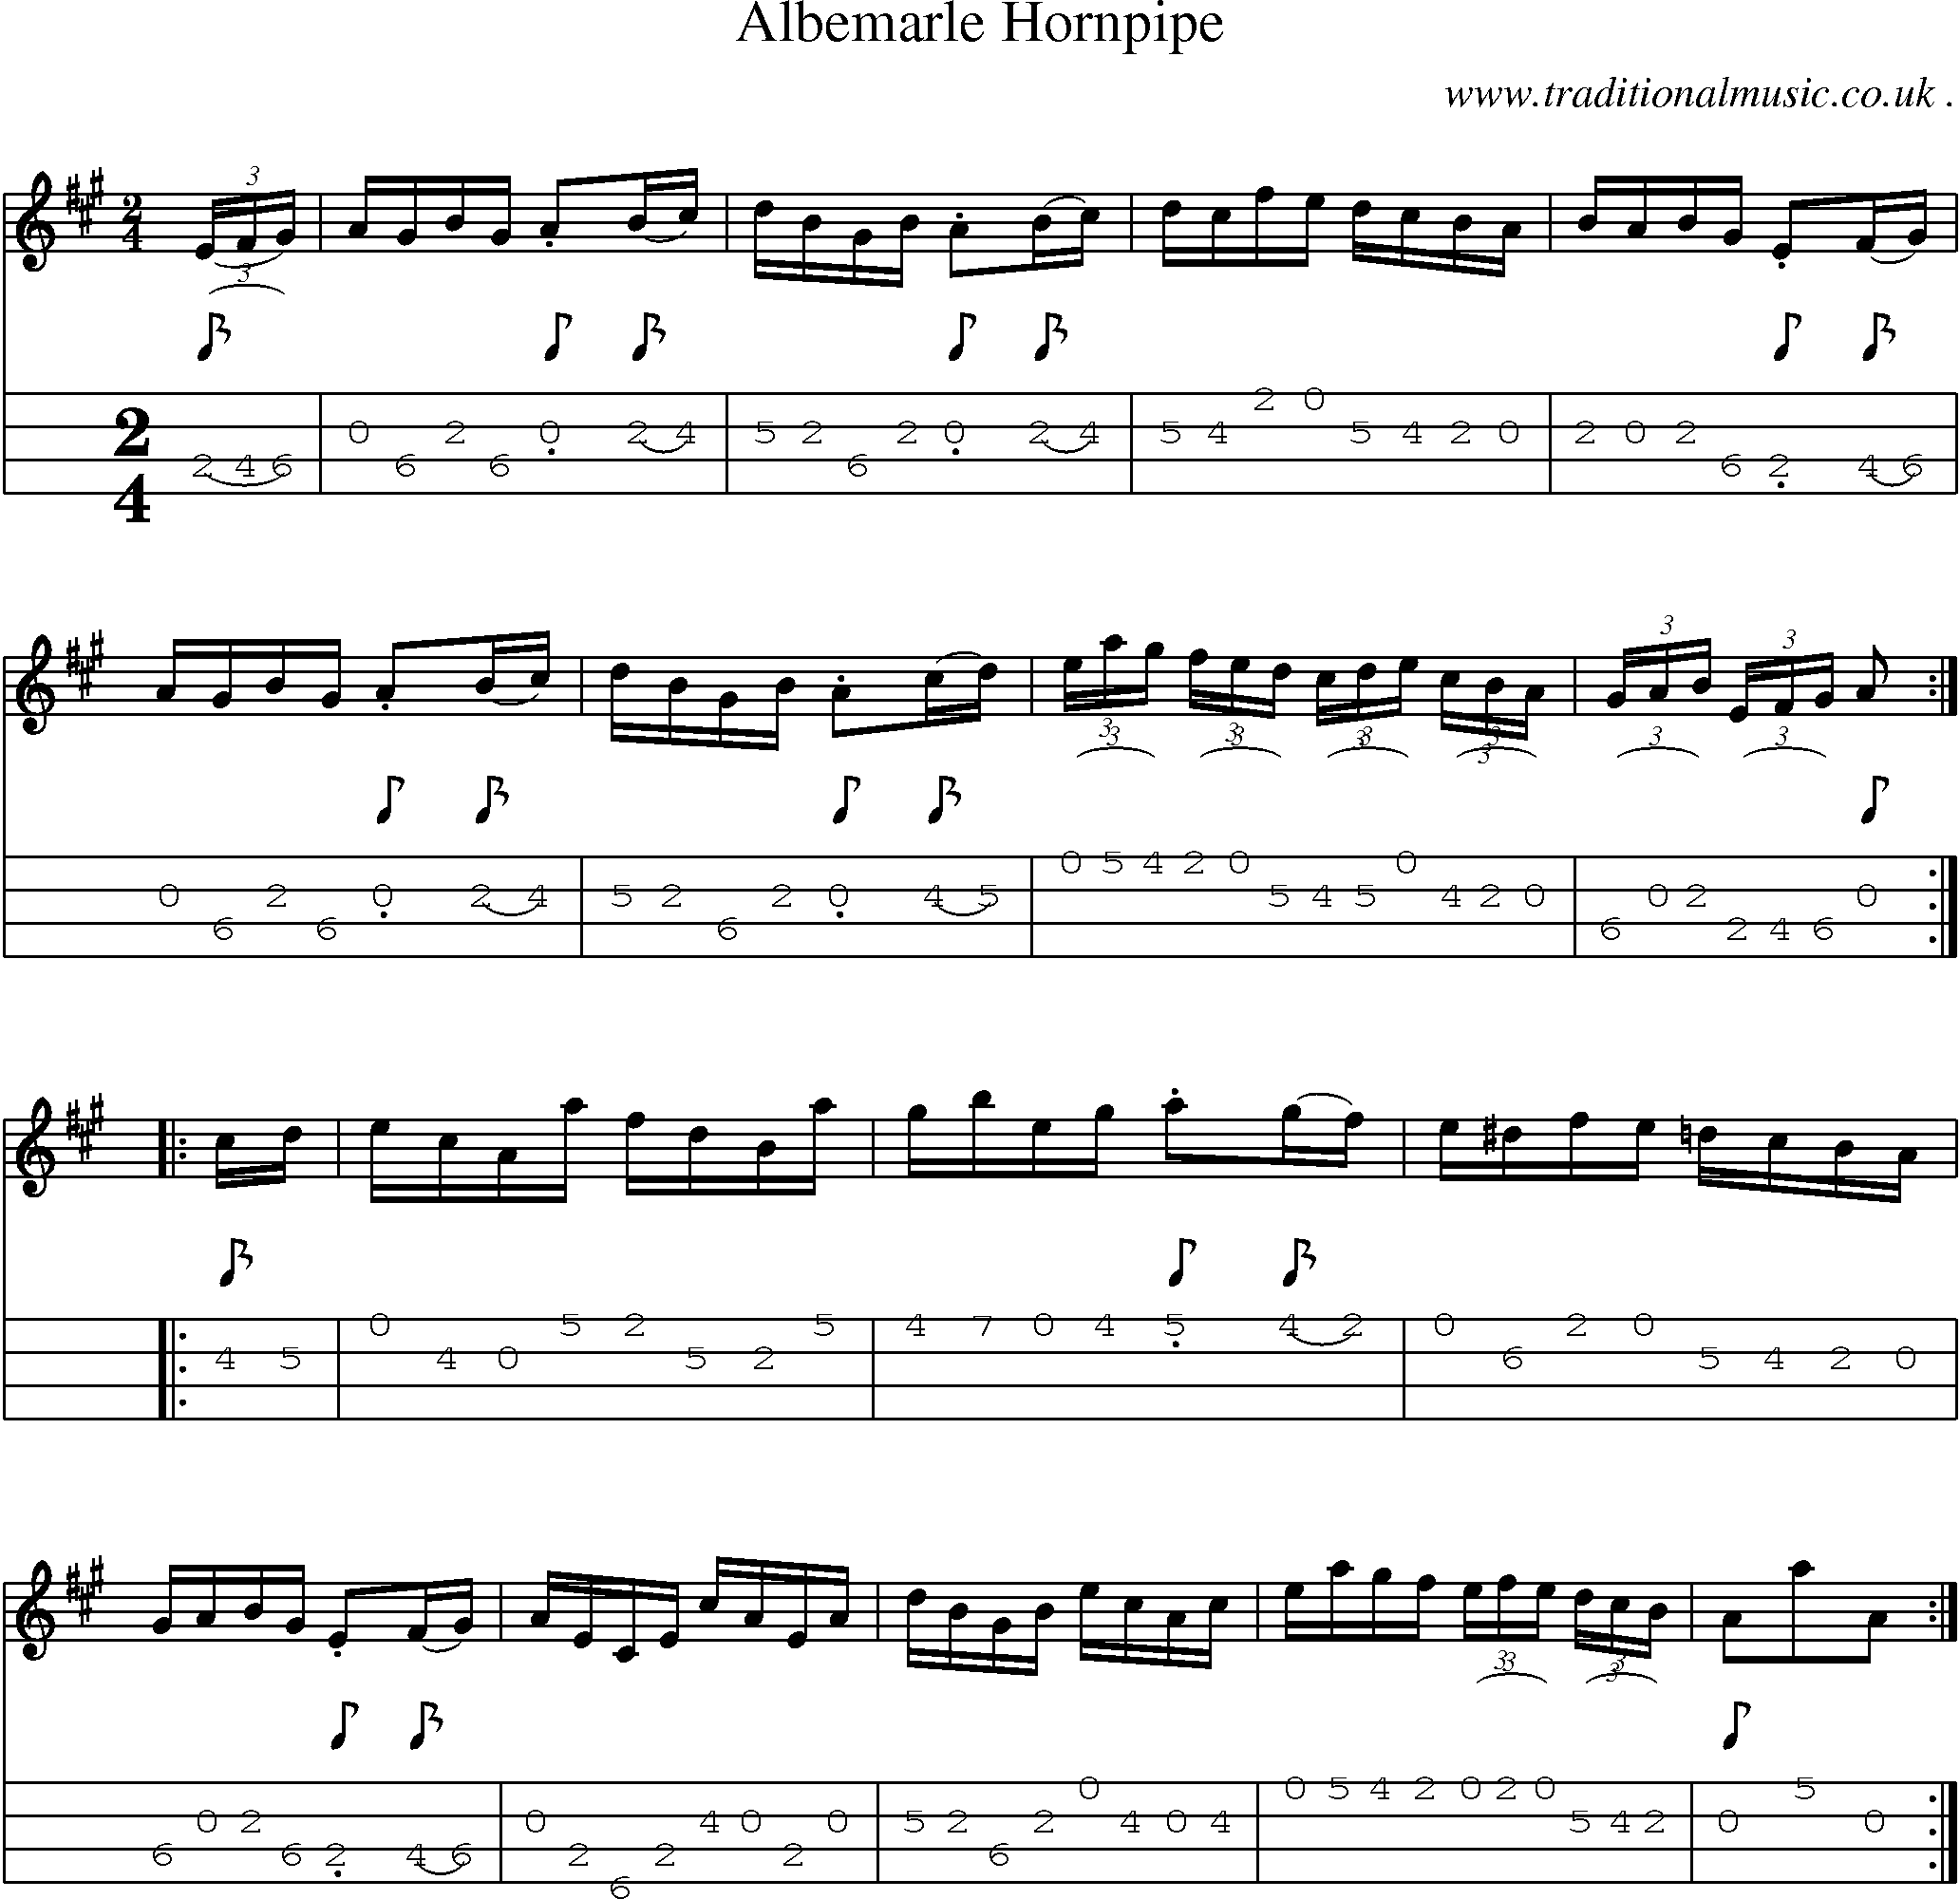 Sheet-Music and Mandolin Tabs for Albemarle Hornpipe